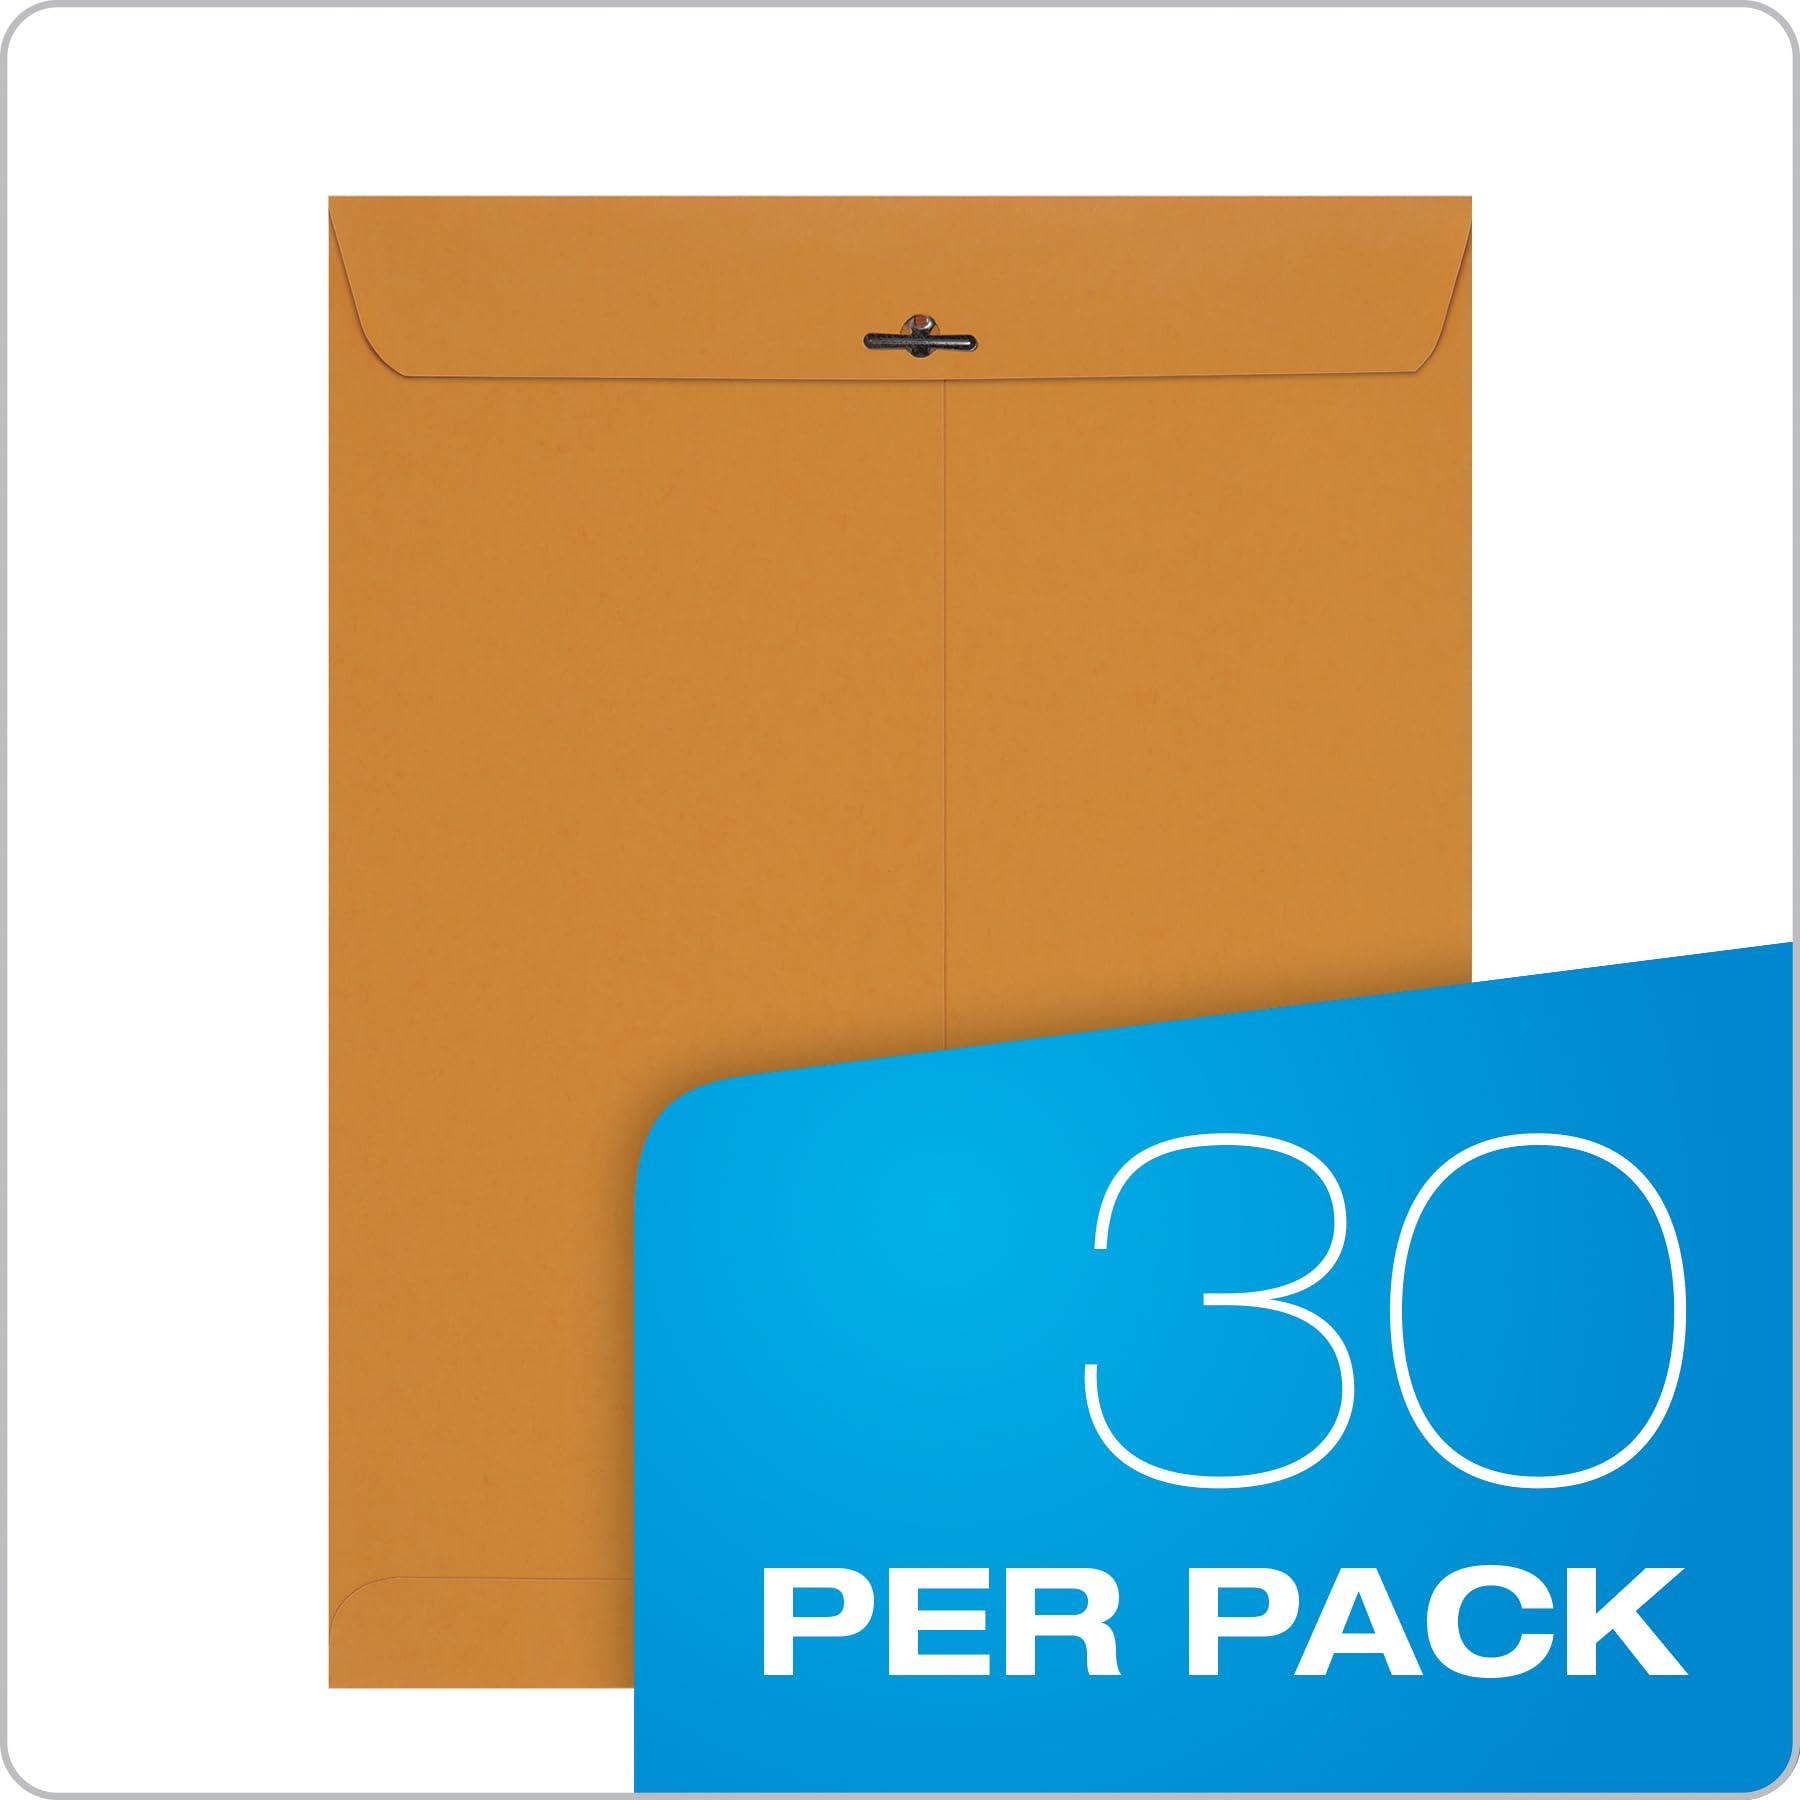 Columbian 10 x 13 Clasp Envelopes, Self Seal, 28 lb Brown Kraft, for Mailing Flat Letter Size Documents or Photos, Bulk Pack, 30 Per Pack (COLO405)